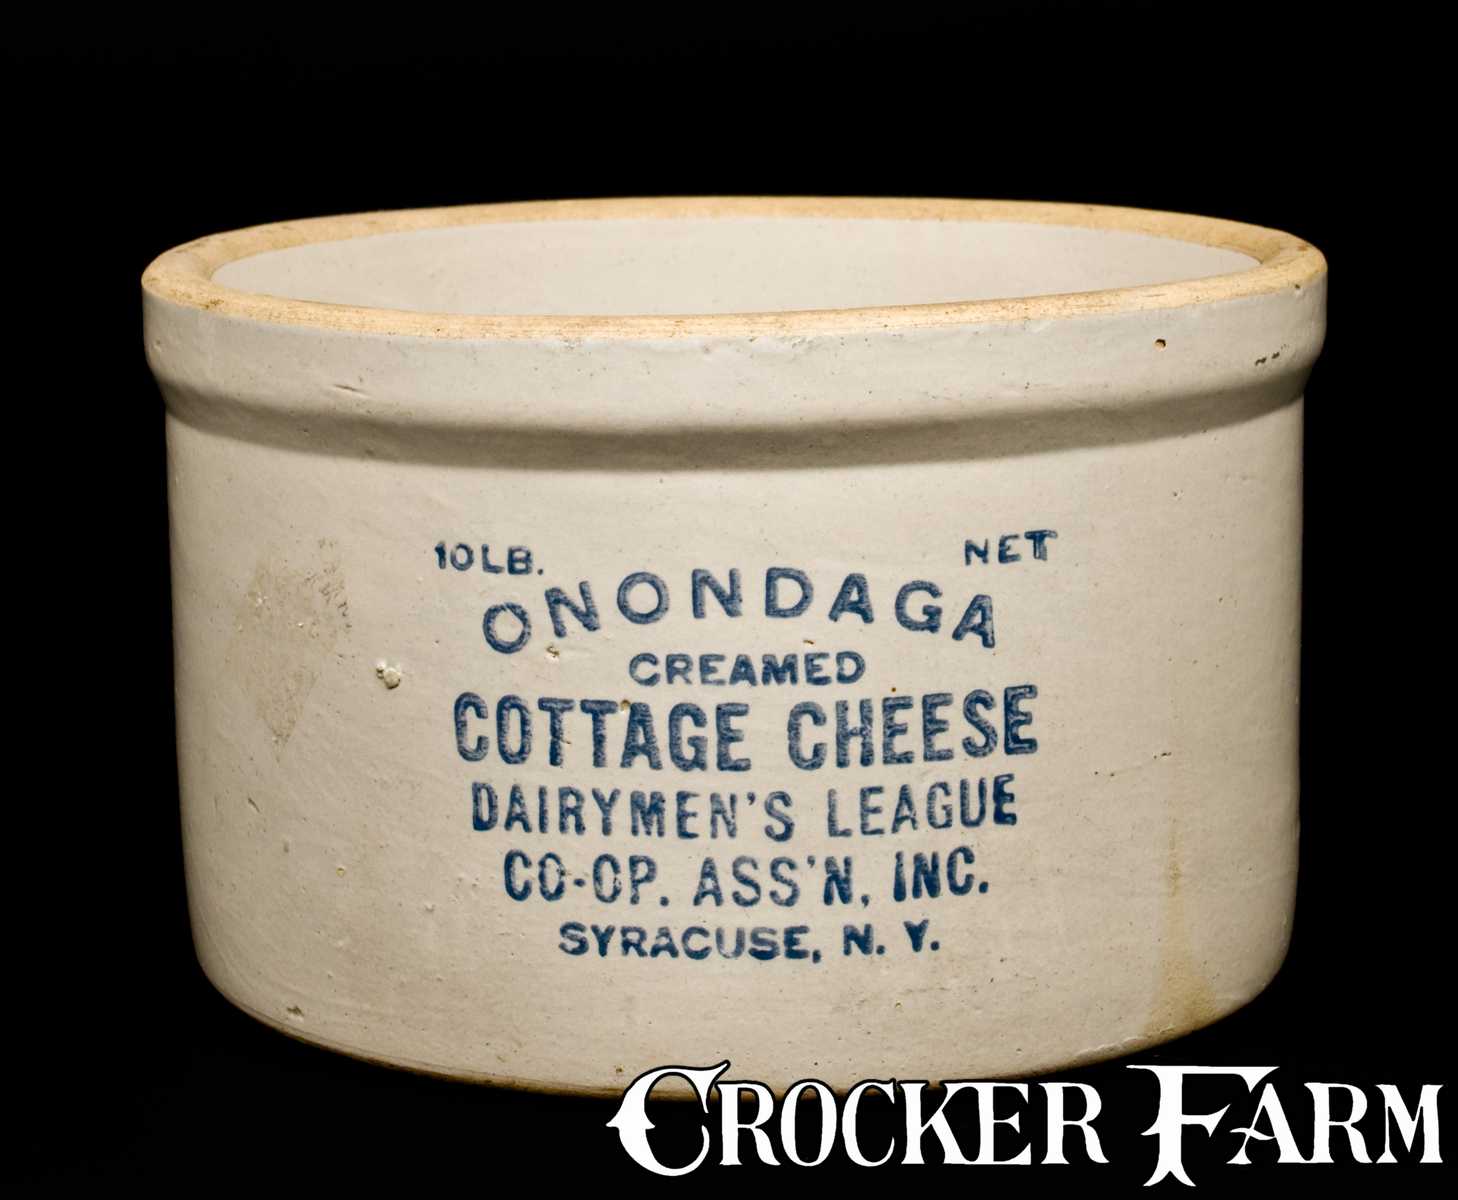 Syracuse Cottage Cheese Crock Lot 165 July 17 2010